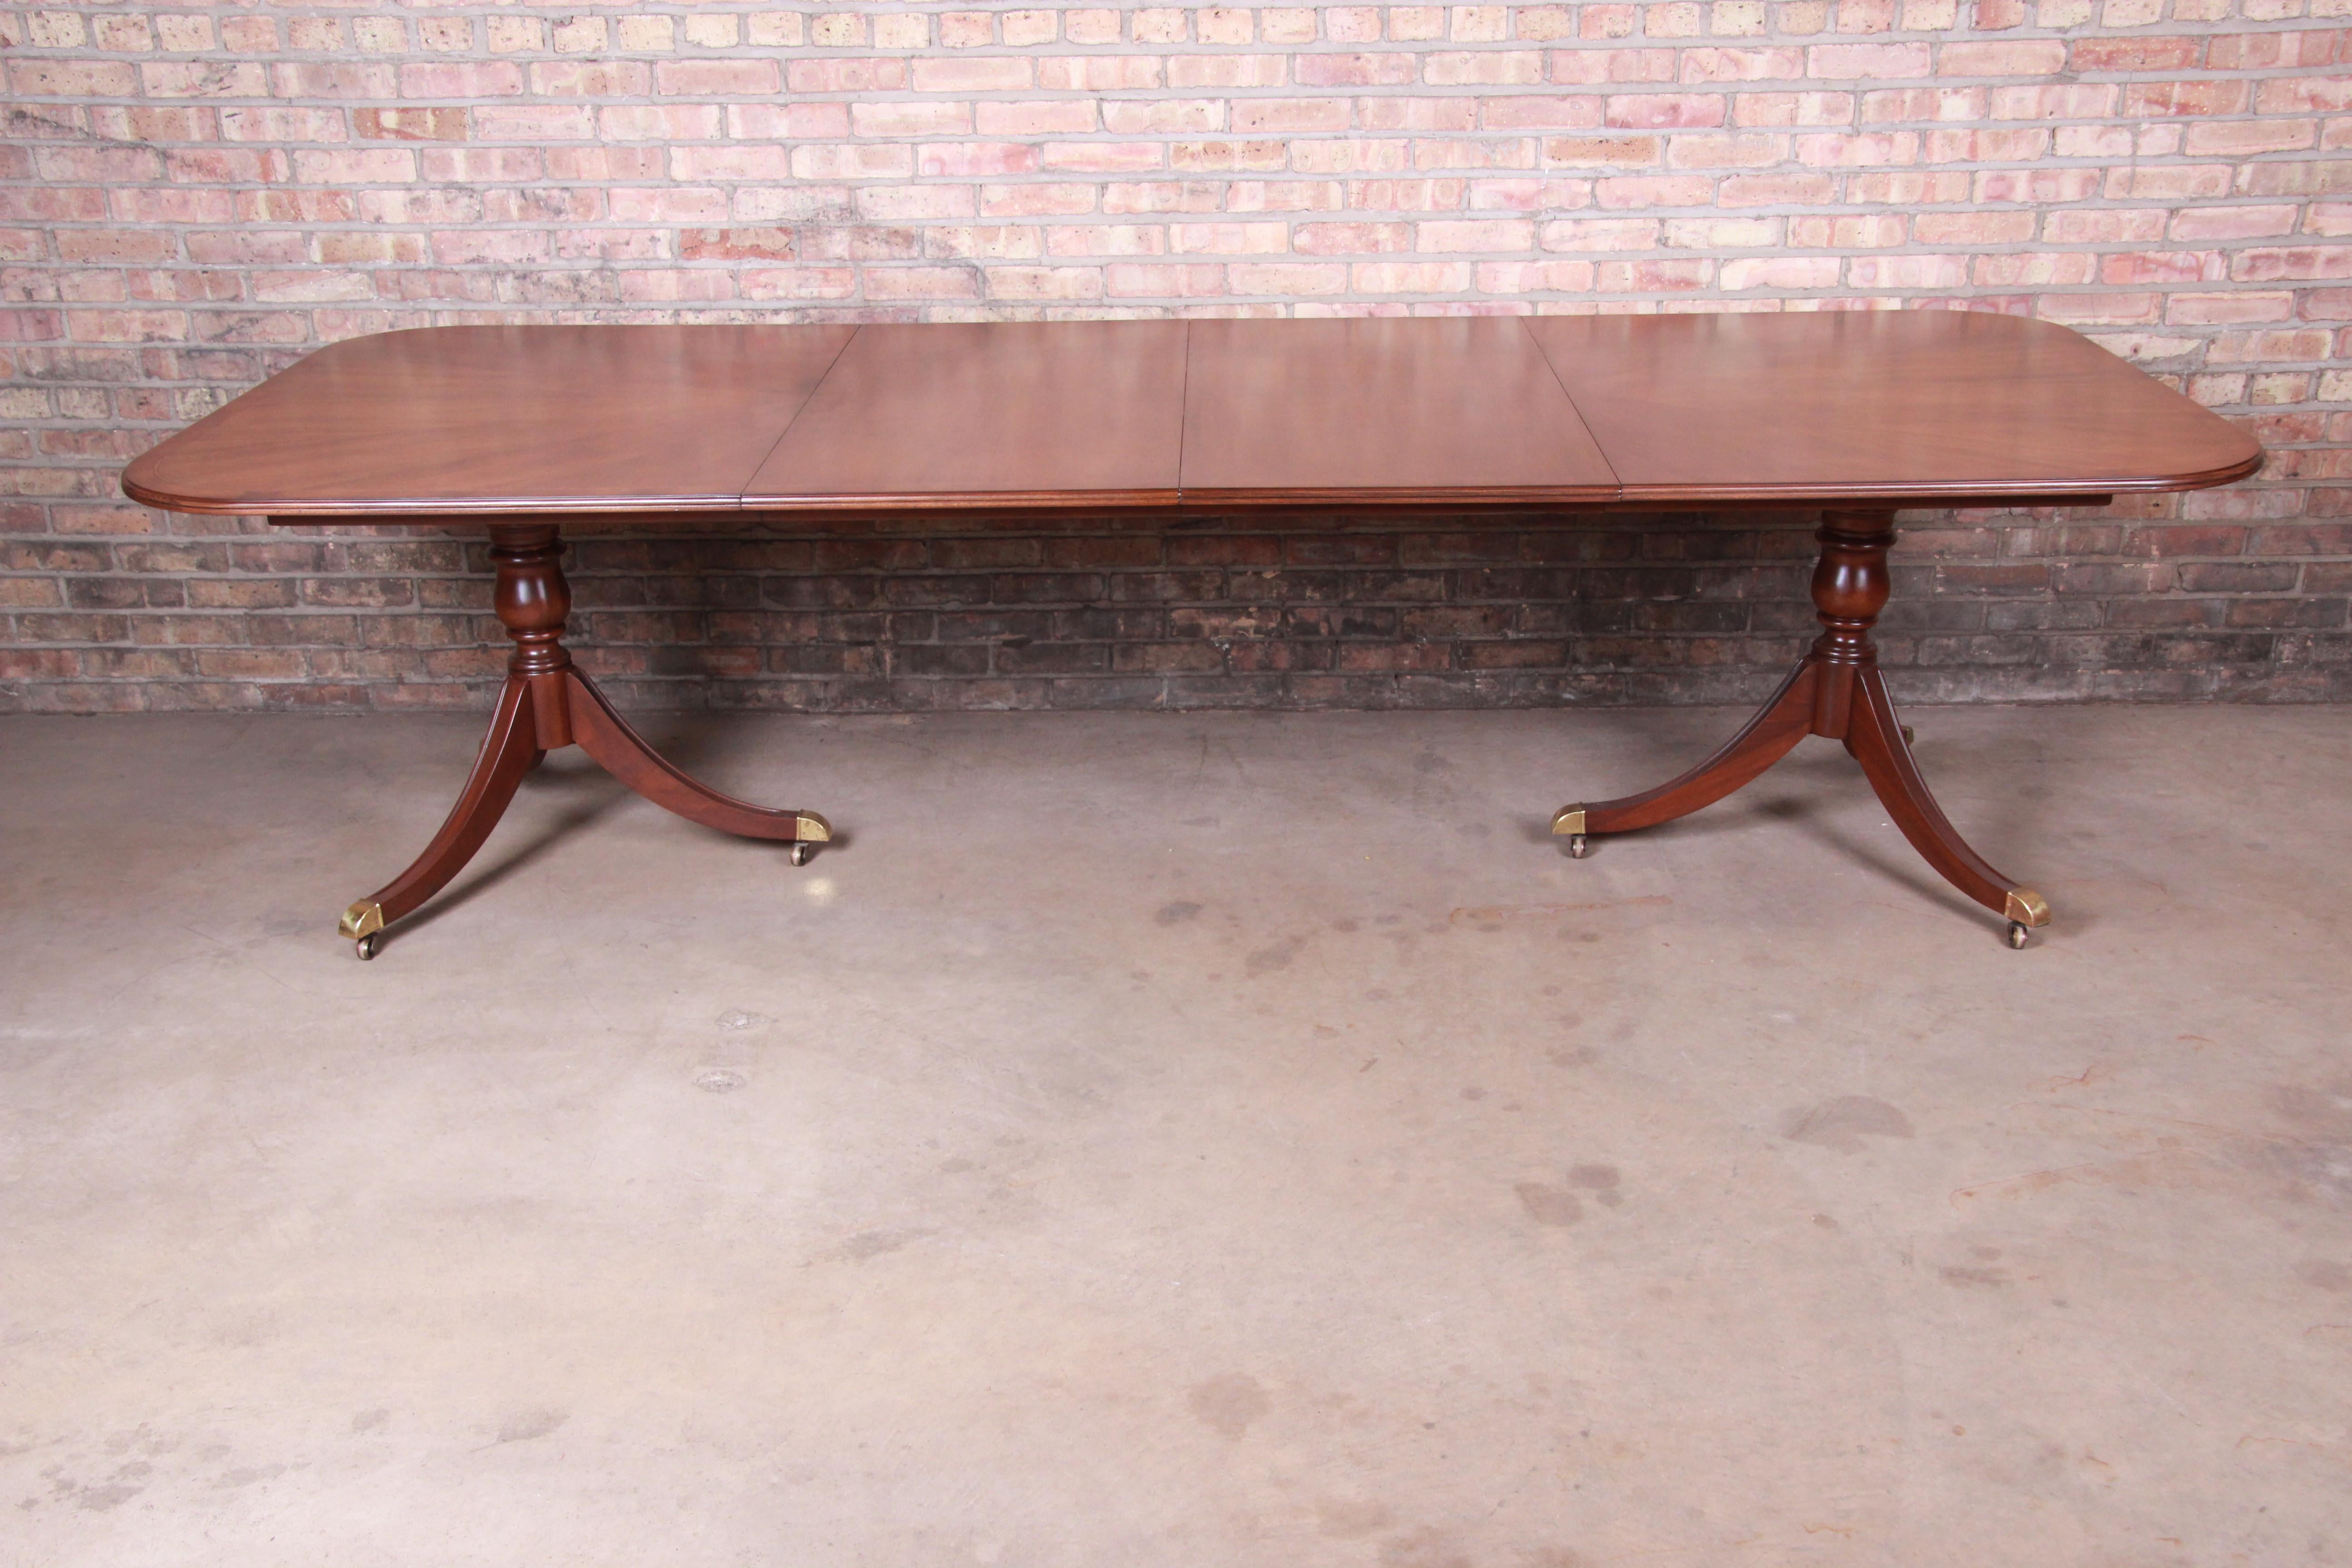 An exceptional Georgian style double pedestal extension dining table

By Drexel Heritage 